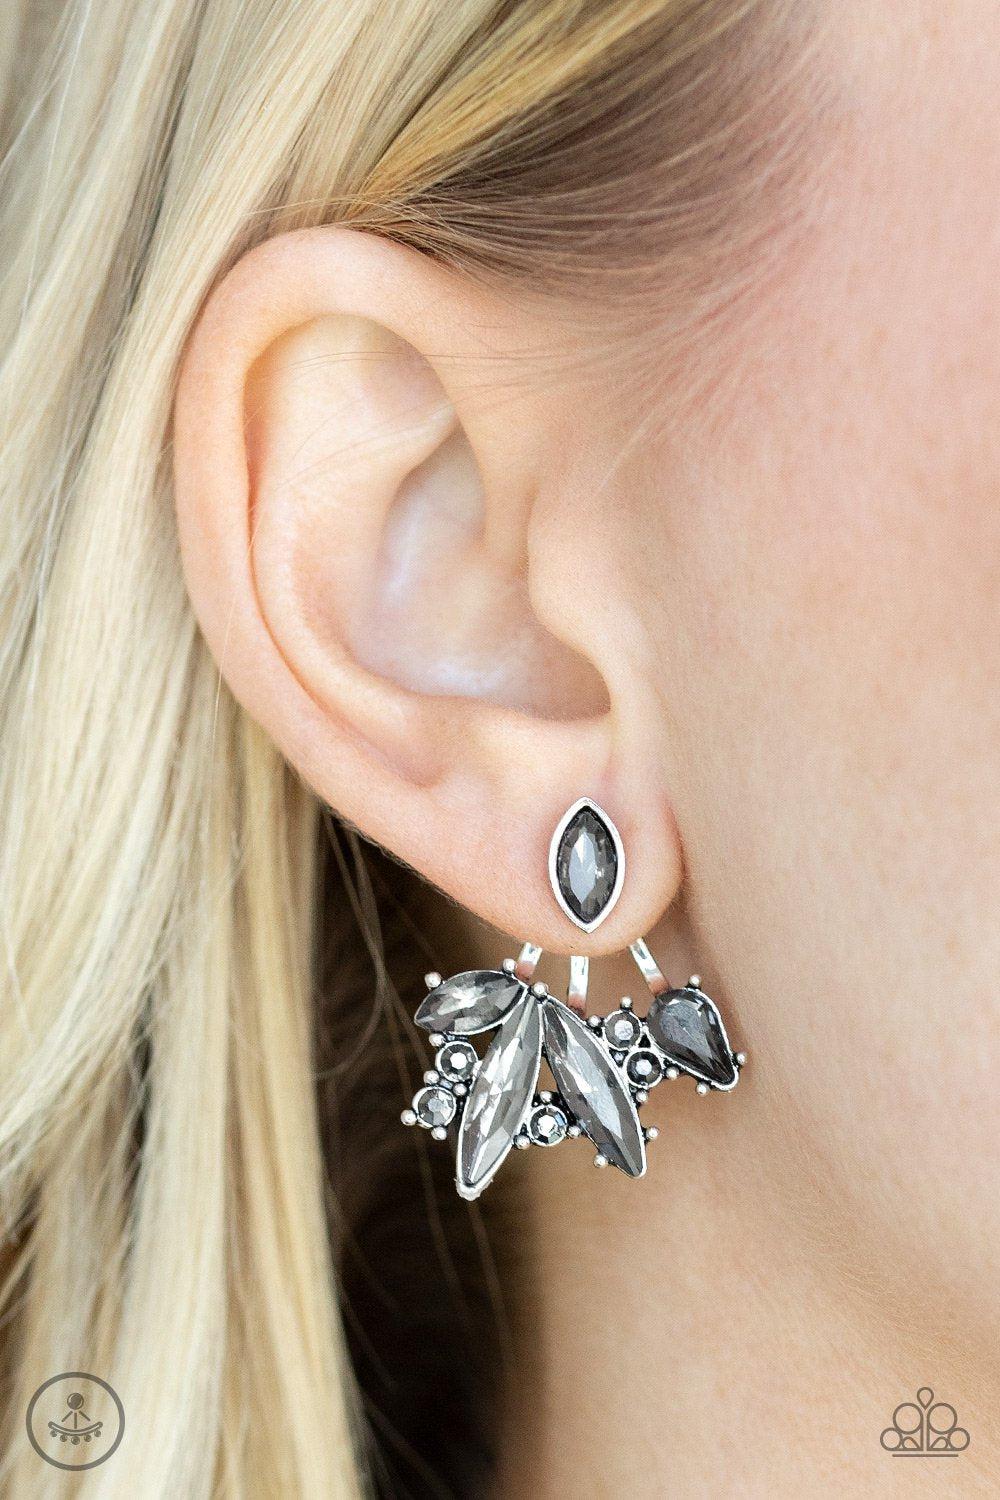 Deco Dynamite Silver Smoky Rhinestone Double-sided Post Earrings - Paparazzi Accessories- model - CarasShop.com - $5 Jewelry by Cara Jewels